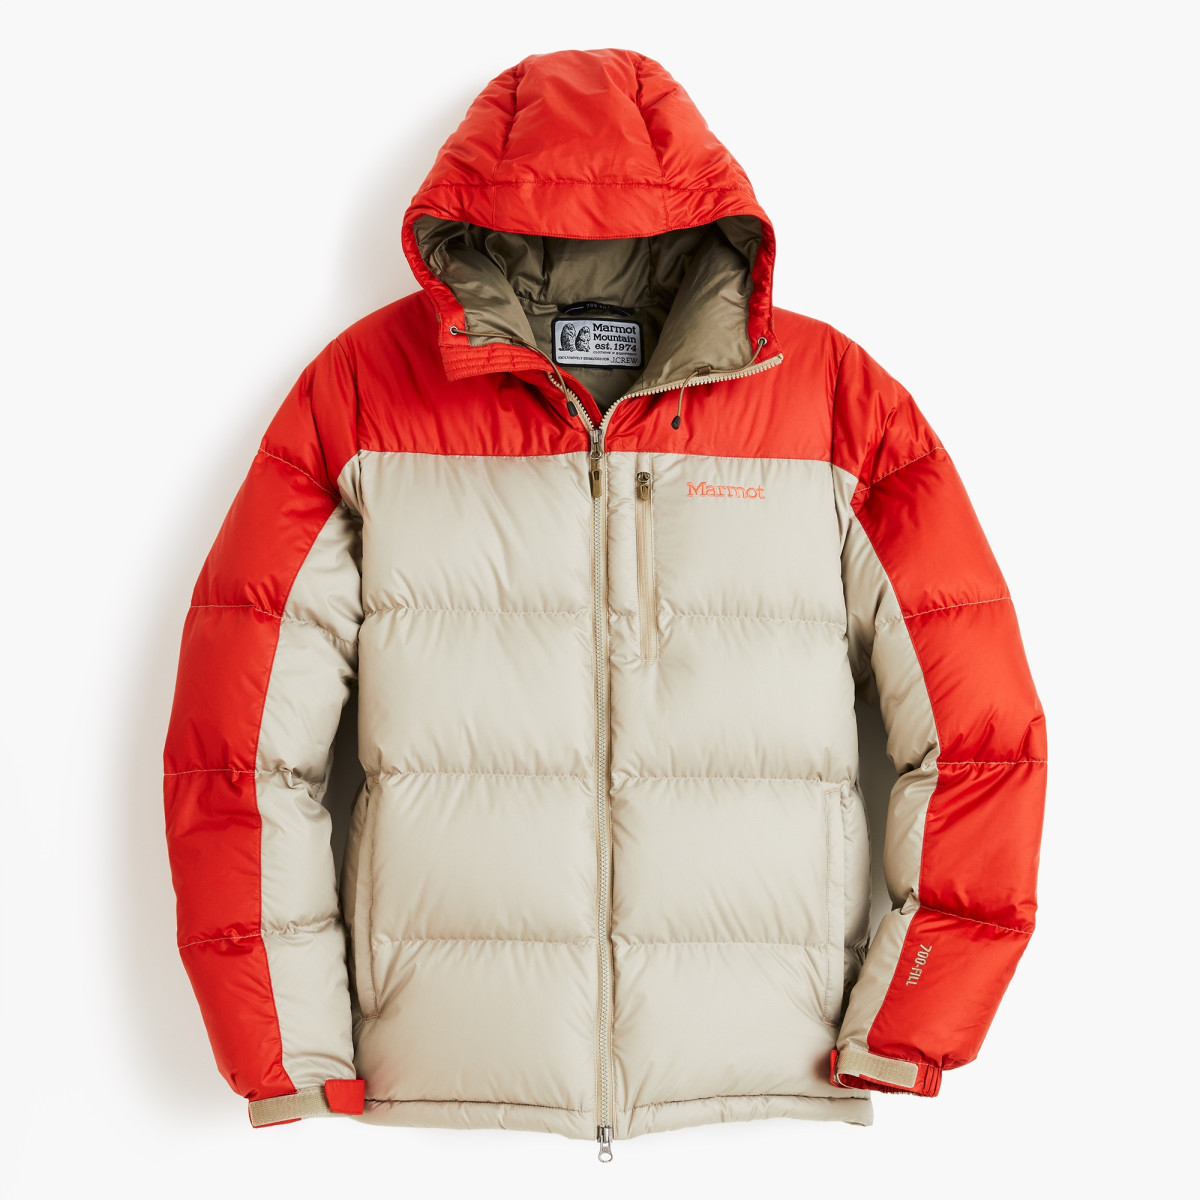 J.Crew, Marmot Team Up for Guides Down Hoodie's 20th Anniversary - Men ...